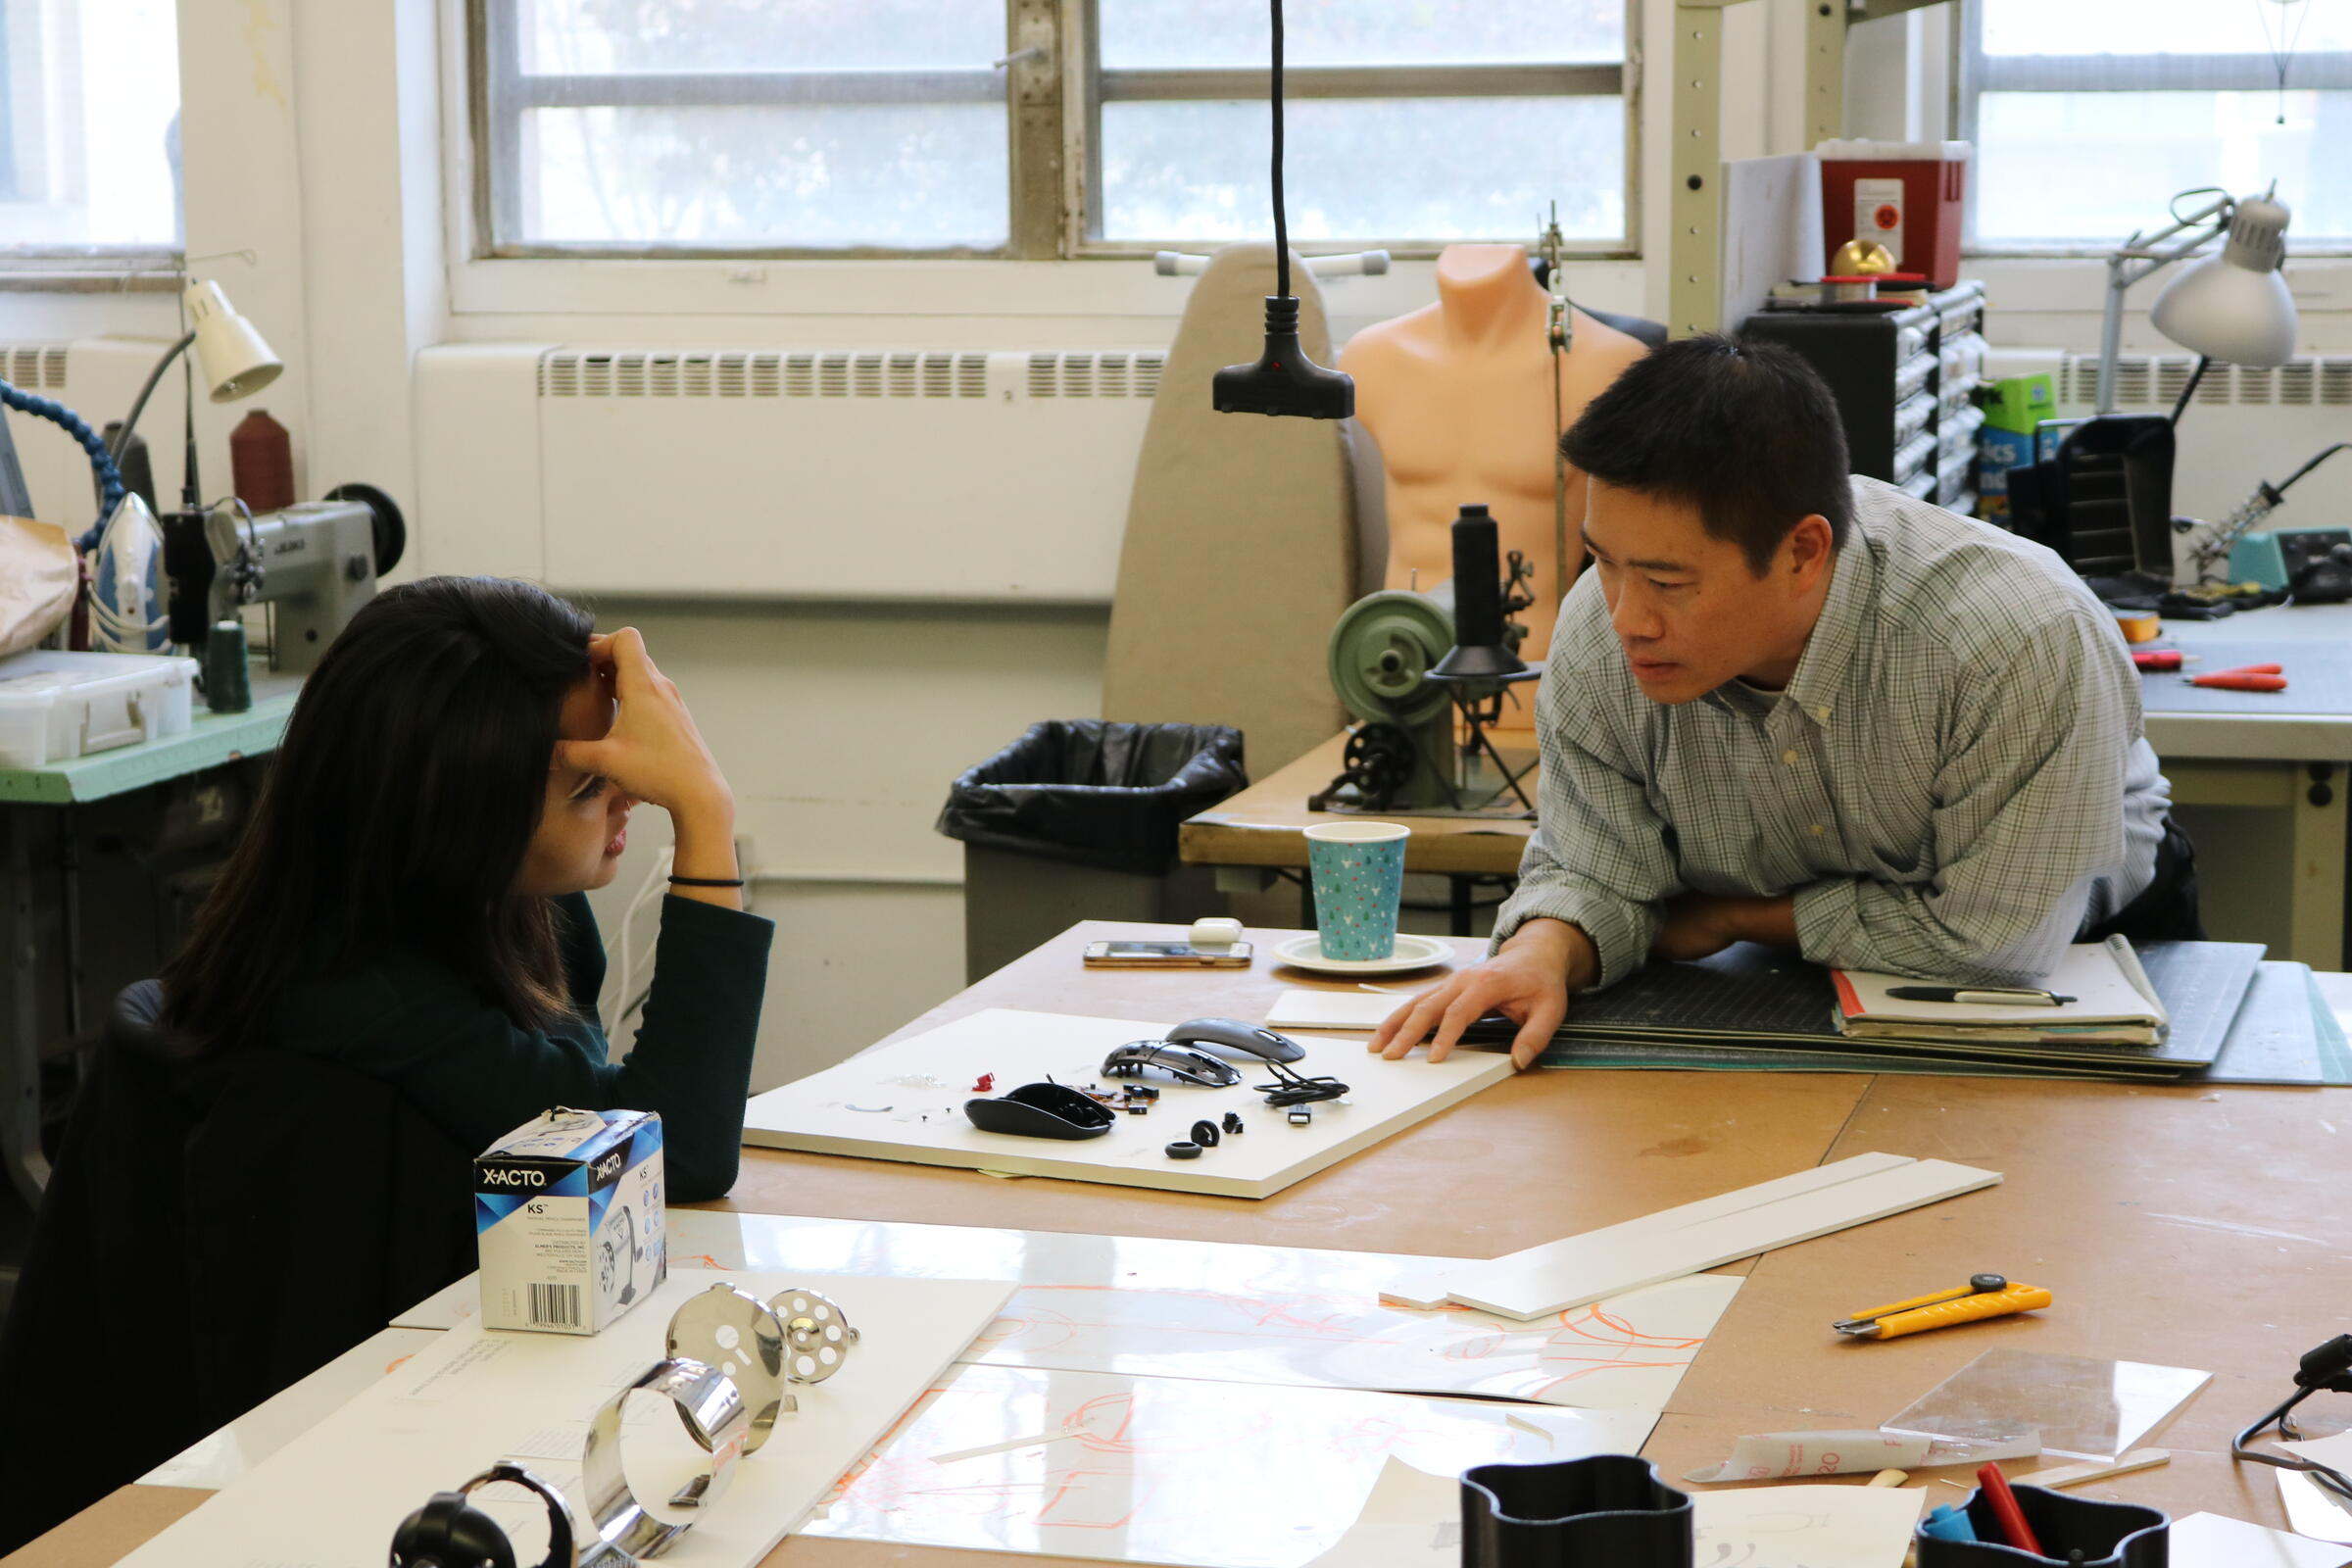 Wayne Chung going over the parts to a computer mouse with a student.